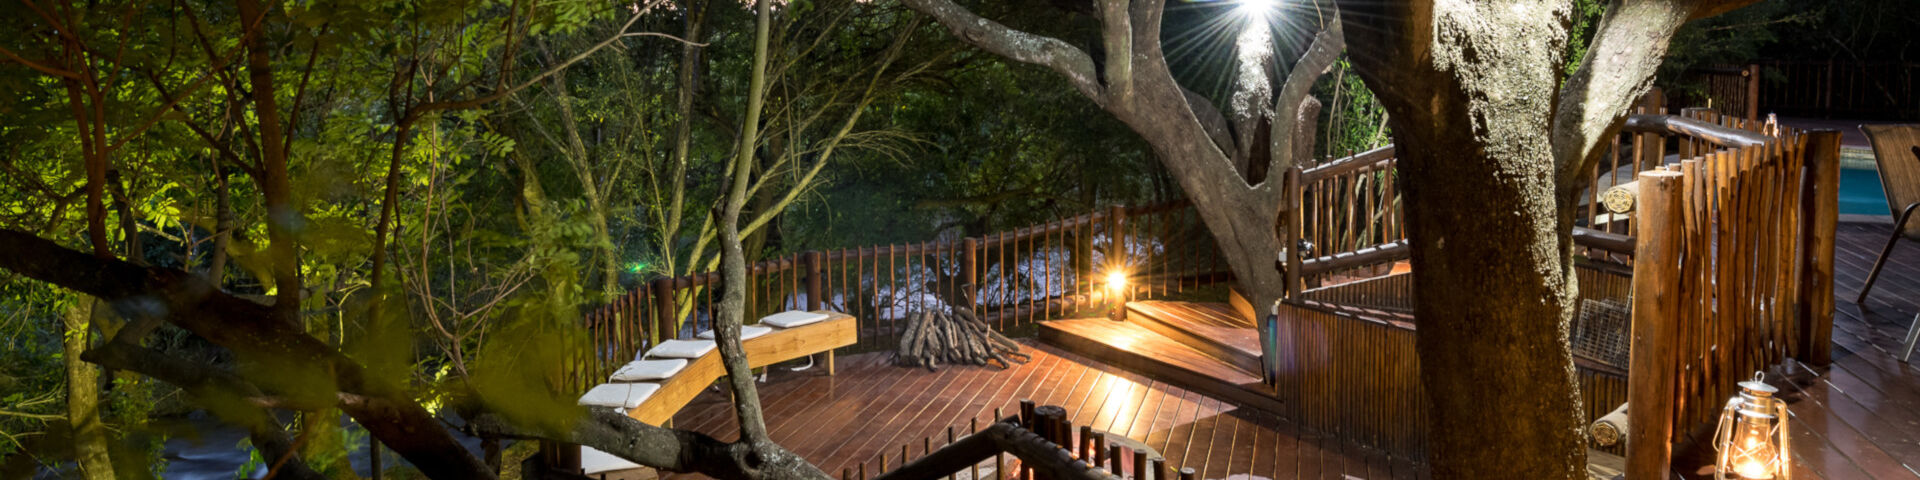 Accommodation in Panorama Route South Africa Island River Lodge